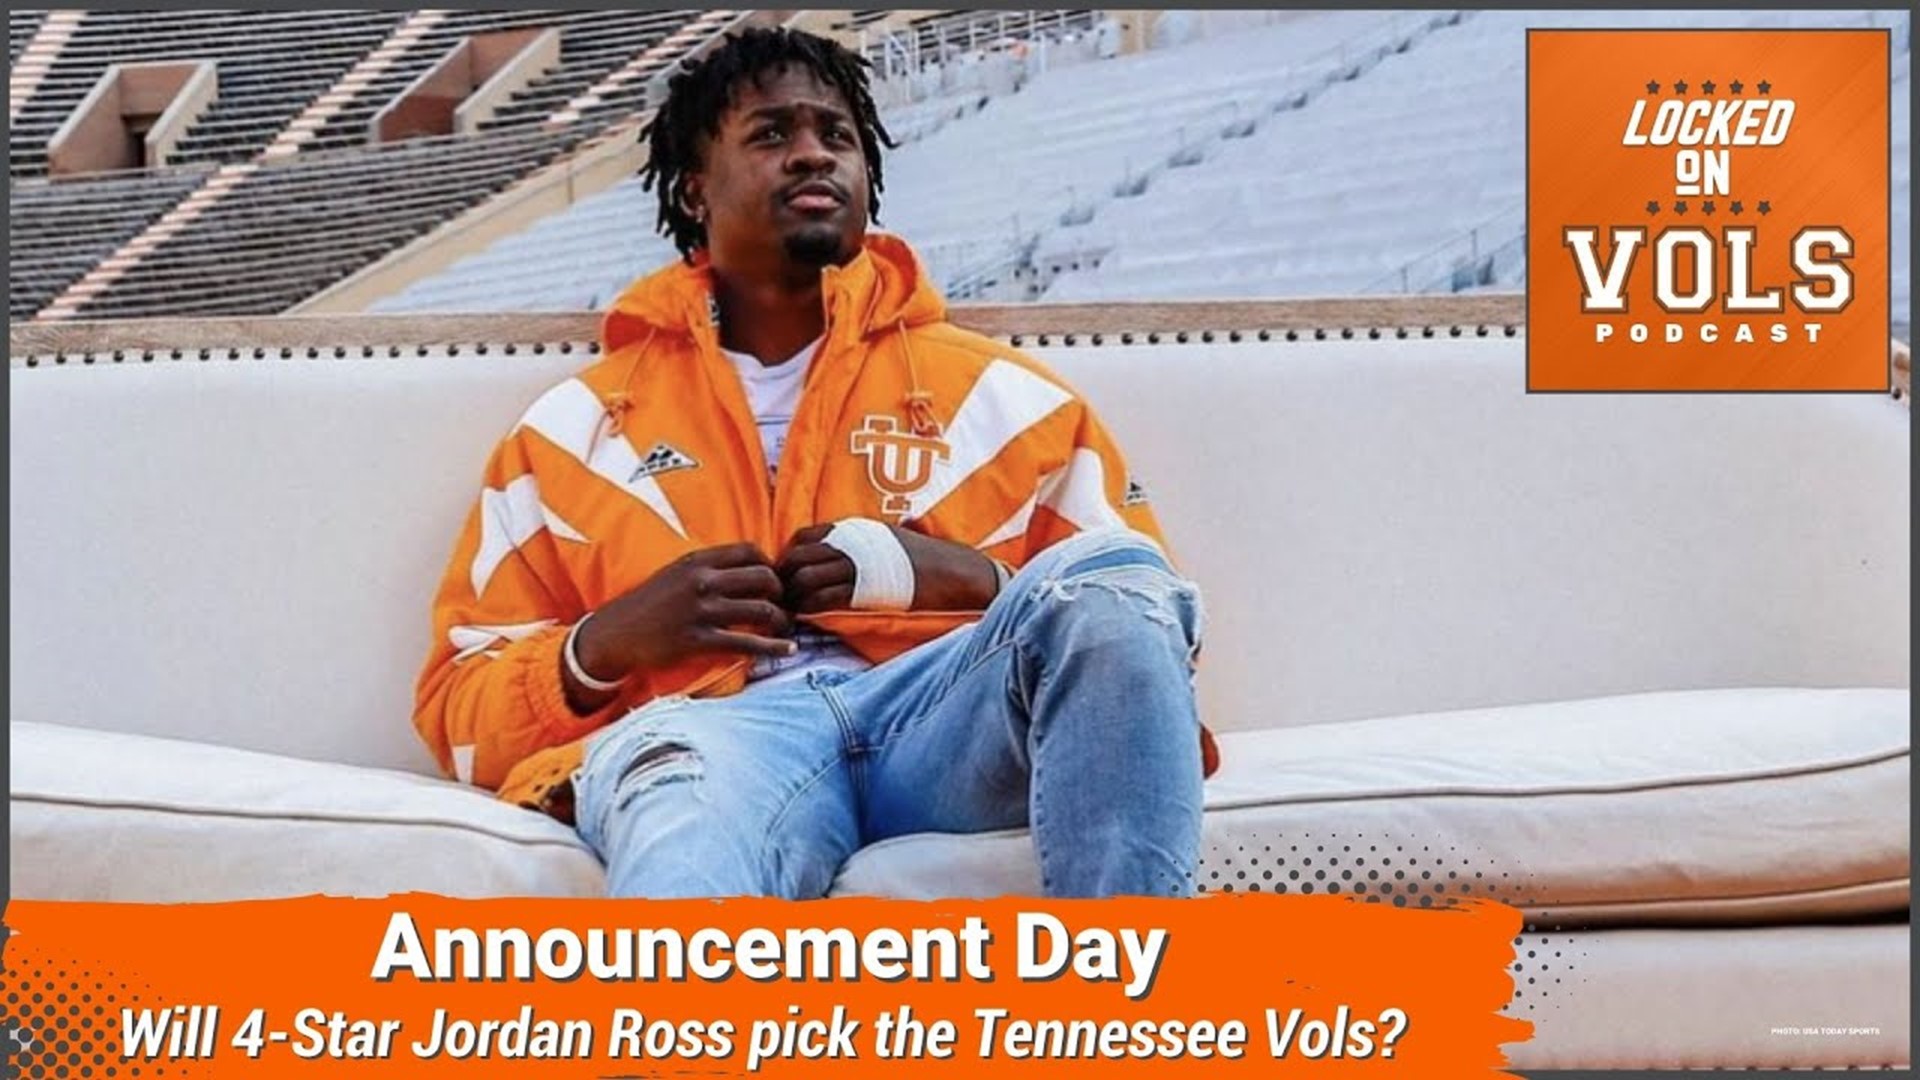 Tennessee Football Recruiting: Will Jordan Ross pick the Vols with announcement on Monday?